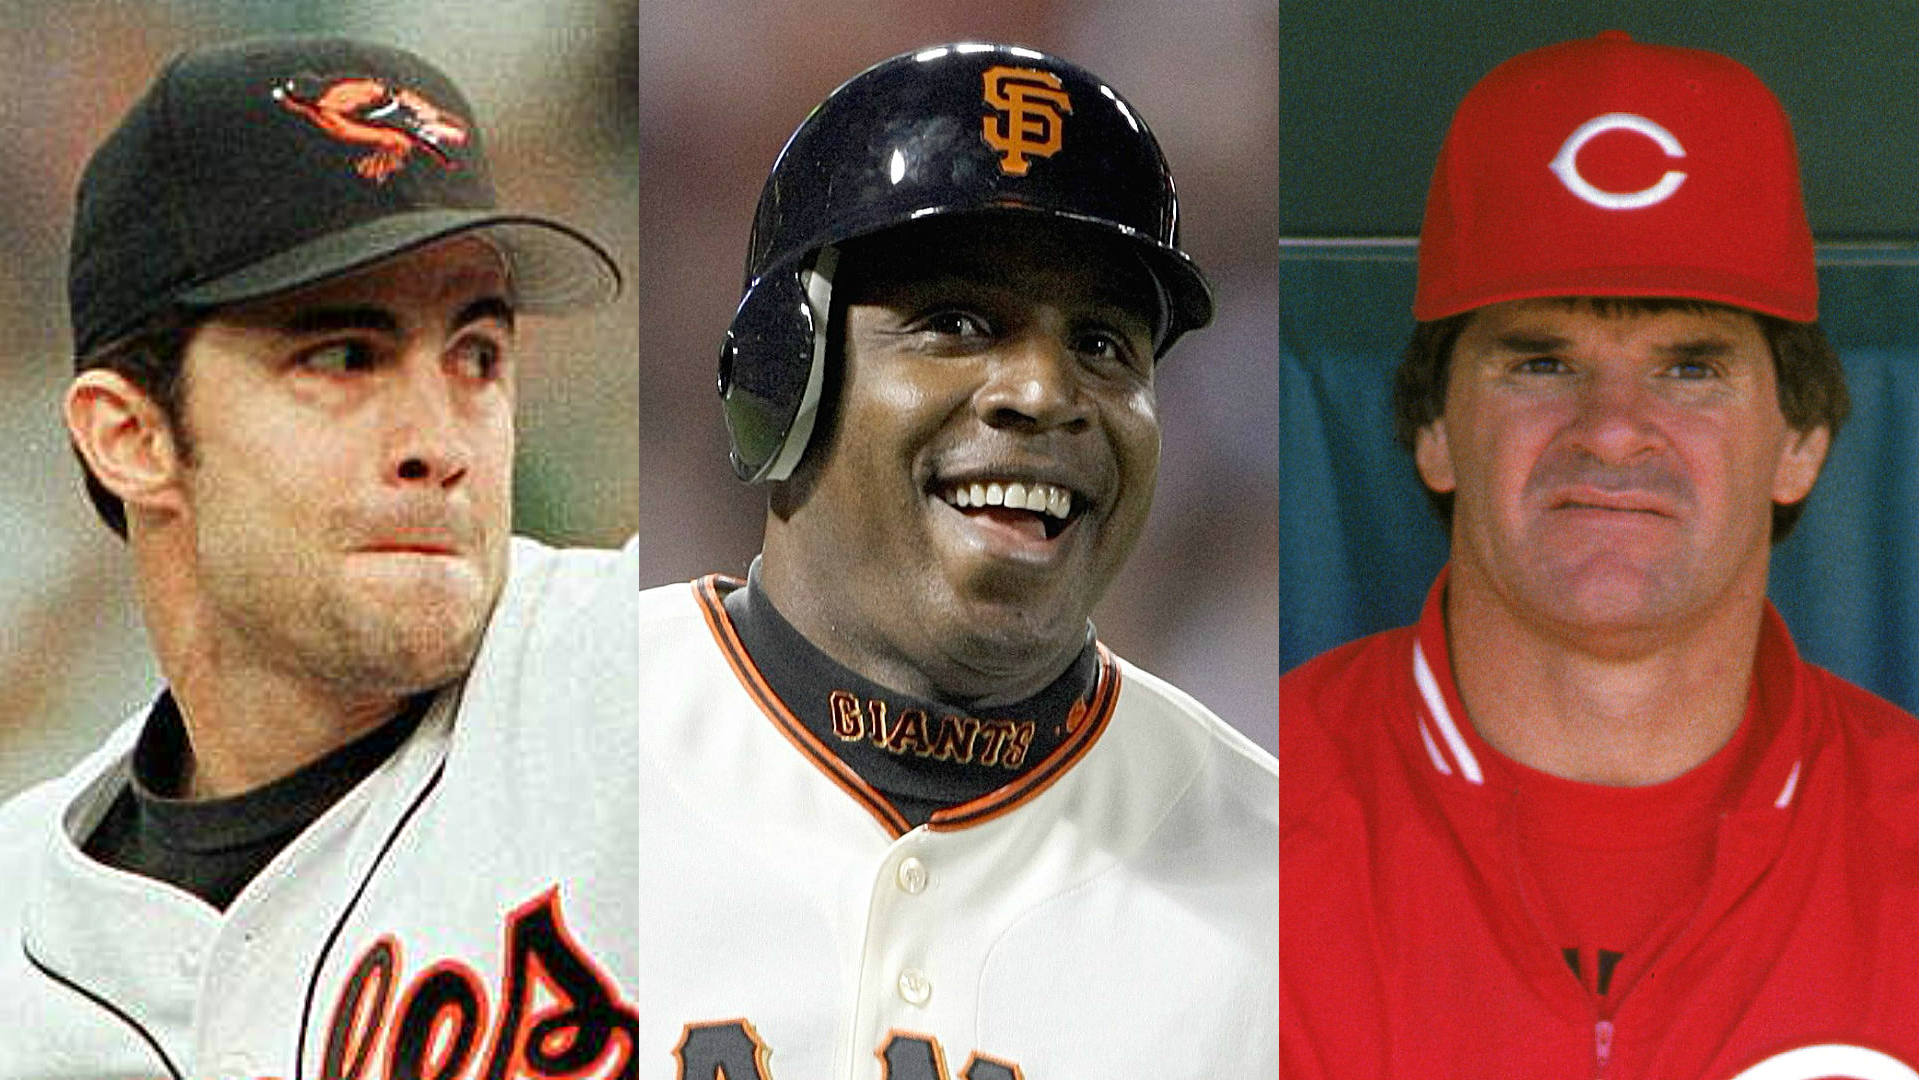 The 25 best players not in the Baseball Hall of Fame | Sporting News1920 x 1080